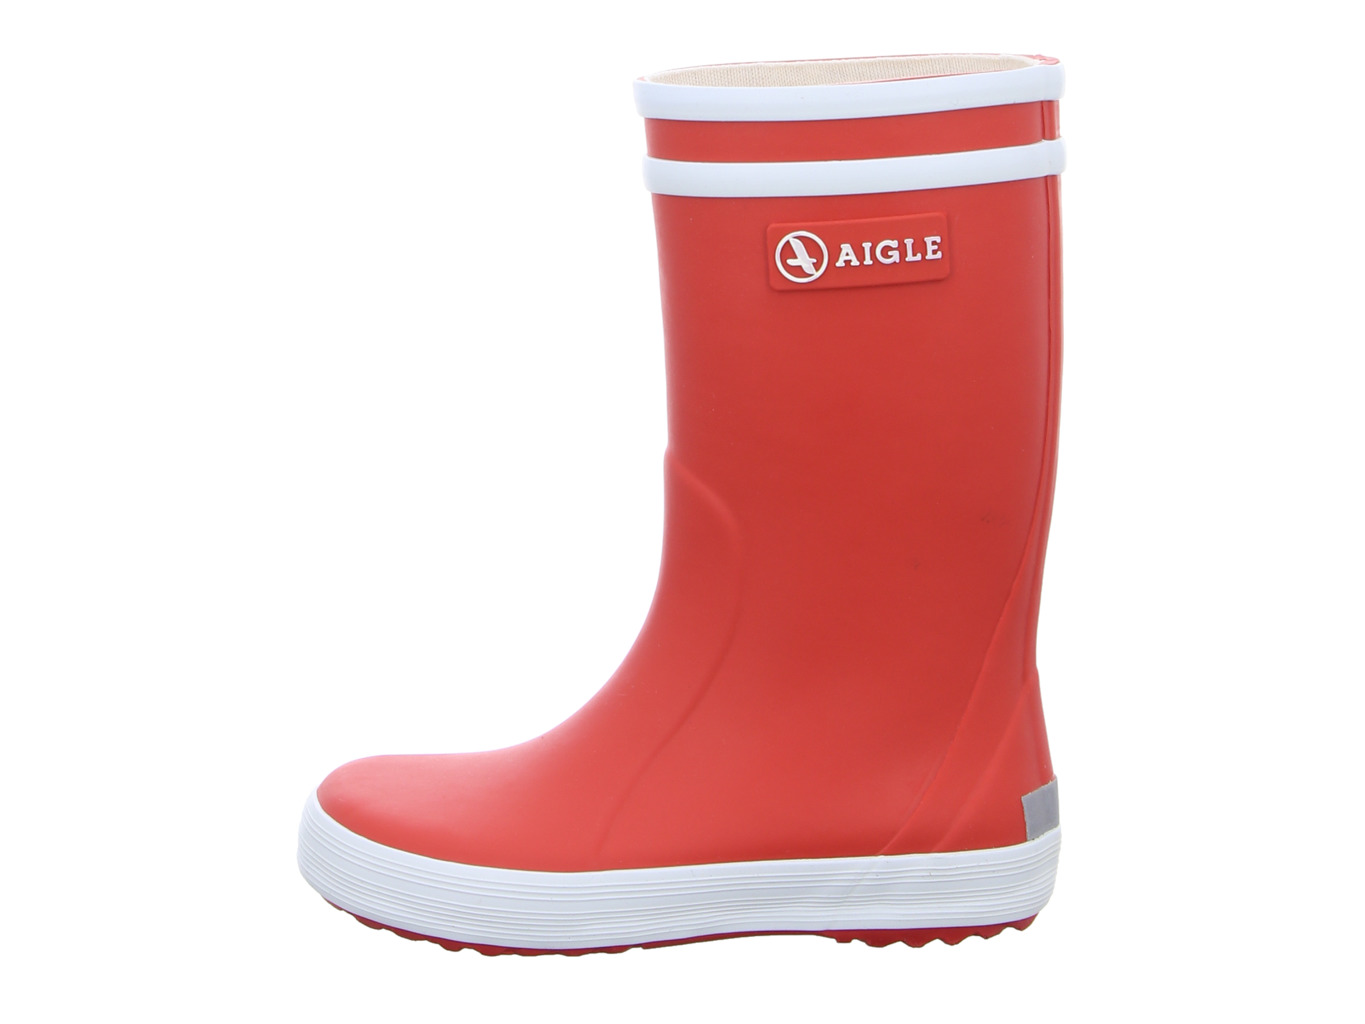 aigle_lolly_pop_rot_84558_3101